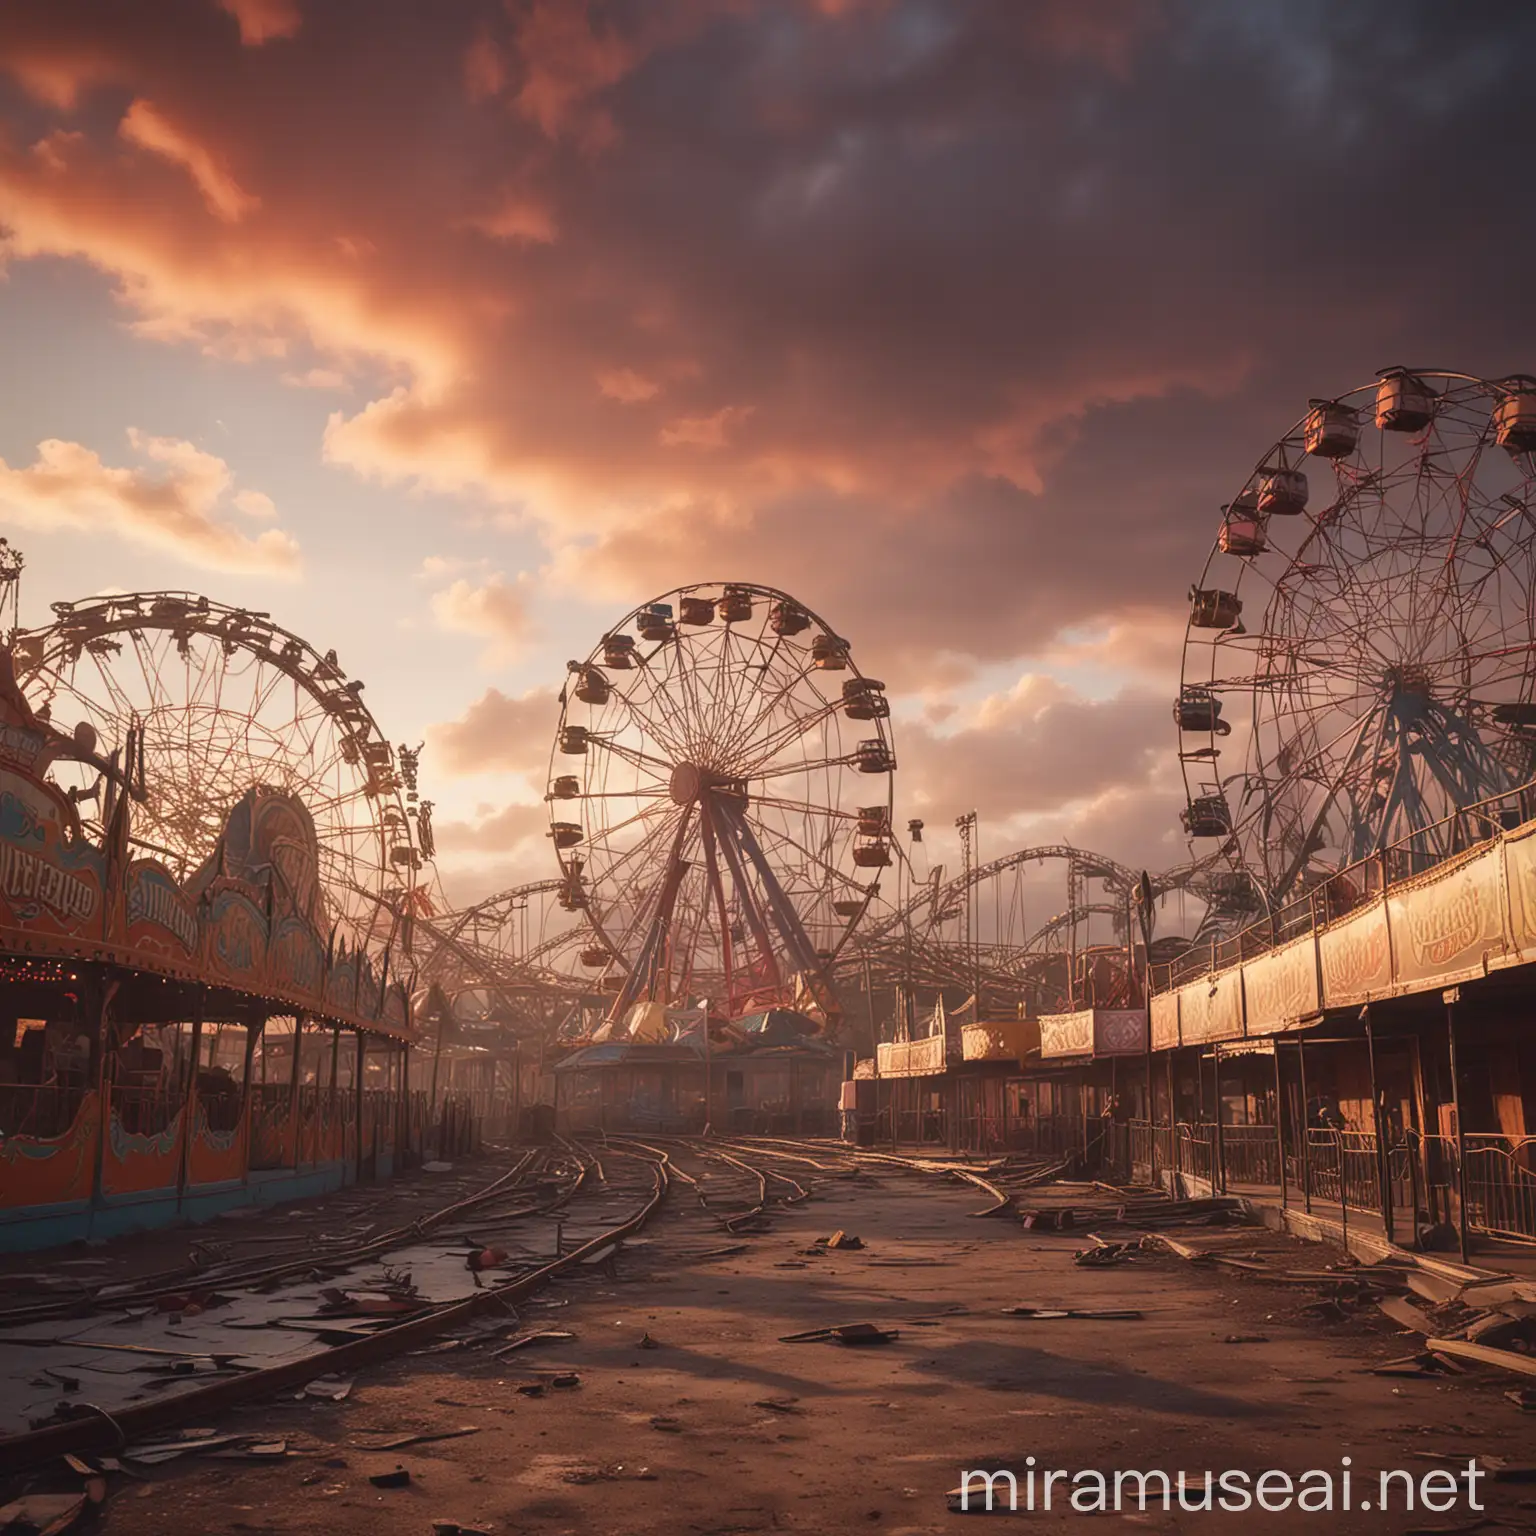 An abandoned and decrepit carnival with a lot of complex rides. Rollercoasters as far as the eye can see. No people visible. Misty background during a sunset with colorful cirrocumulus clouds. Hyper realistic. Stylized. Muted Color. Dramatic Light. Misty. Nostalgic. Shallow Depth of Field. Science Fiction.